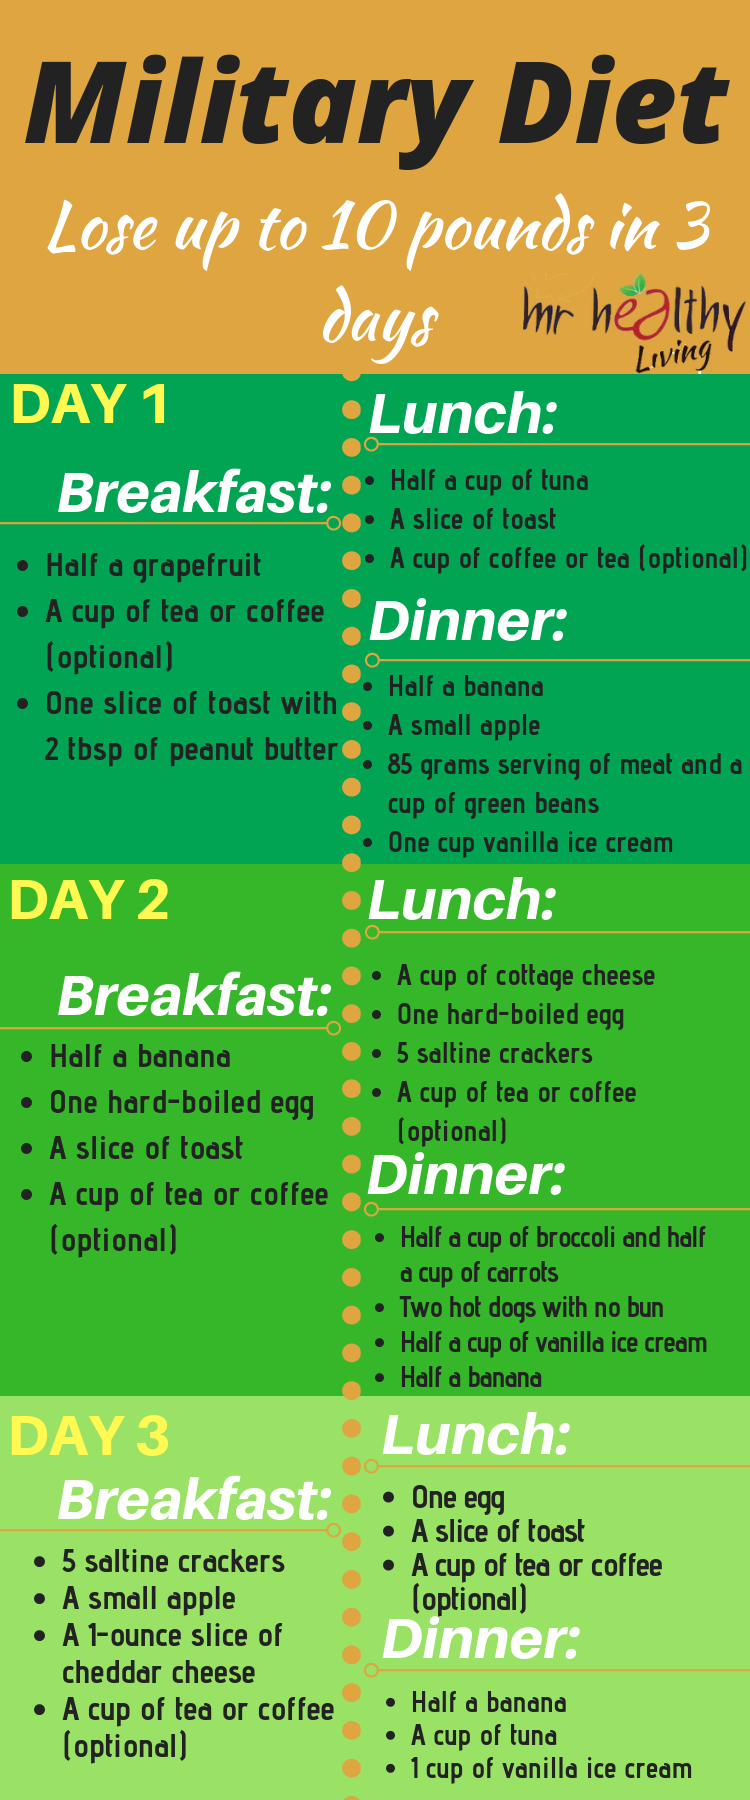 Lose up to 10 pounds in 3 days with the Military Diet! -   15 diet Before And After eating plans ideas